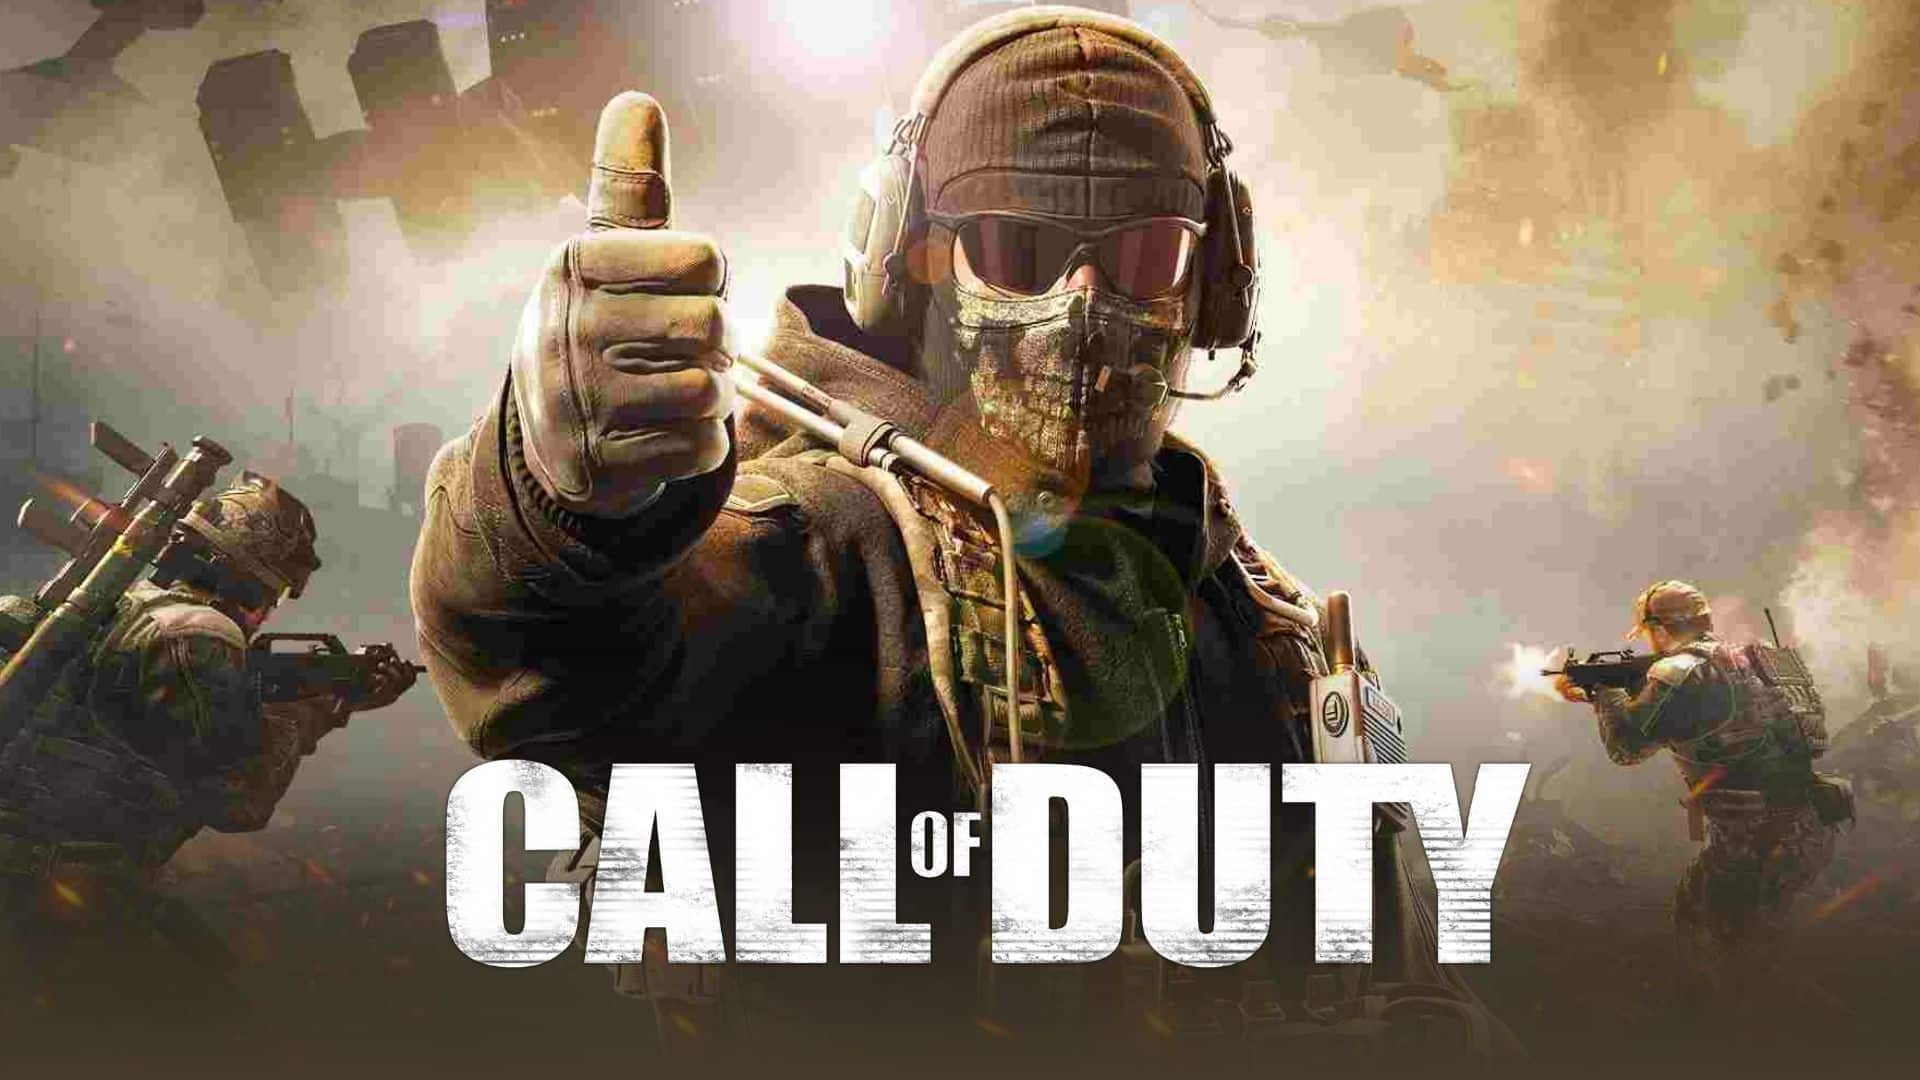 Report: Call of Duty 2023 Delay Until 2024